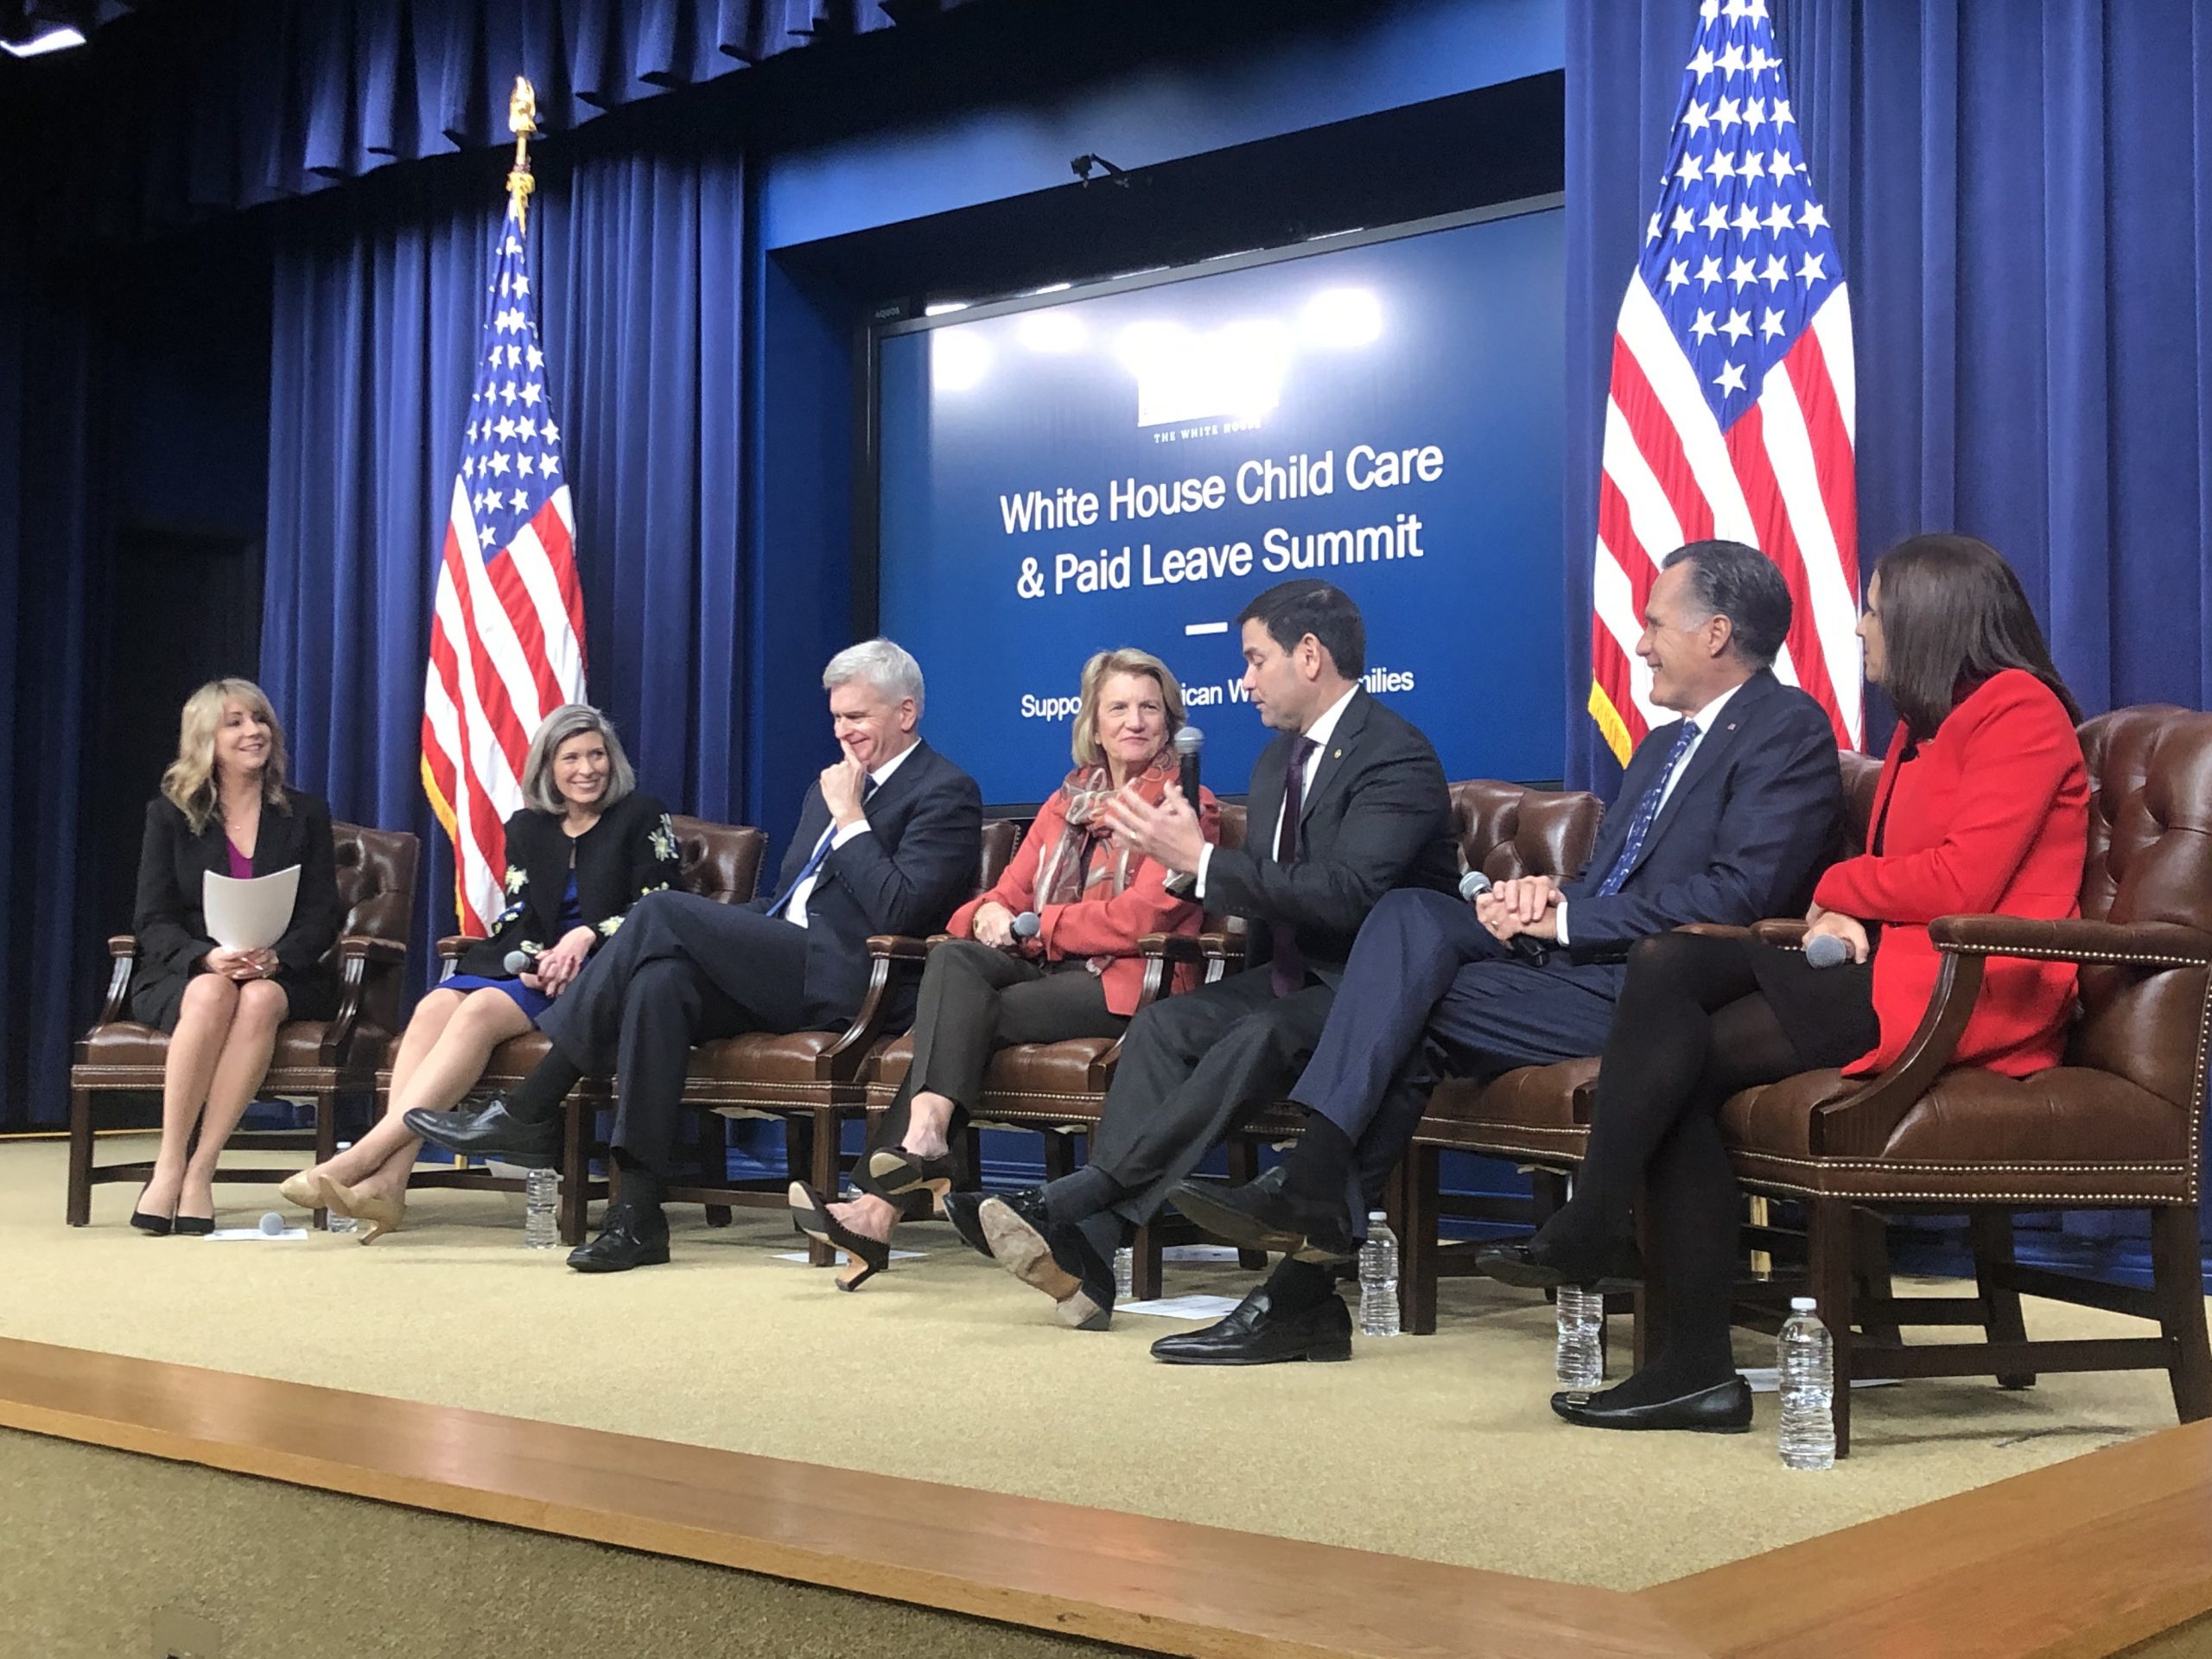 White House Child Care & Paid Leave Summit